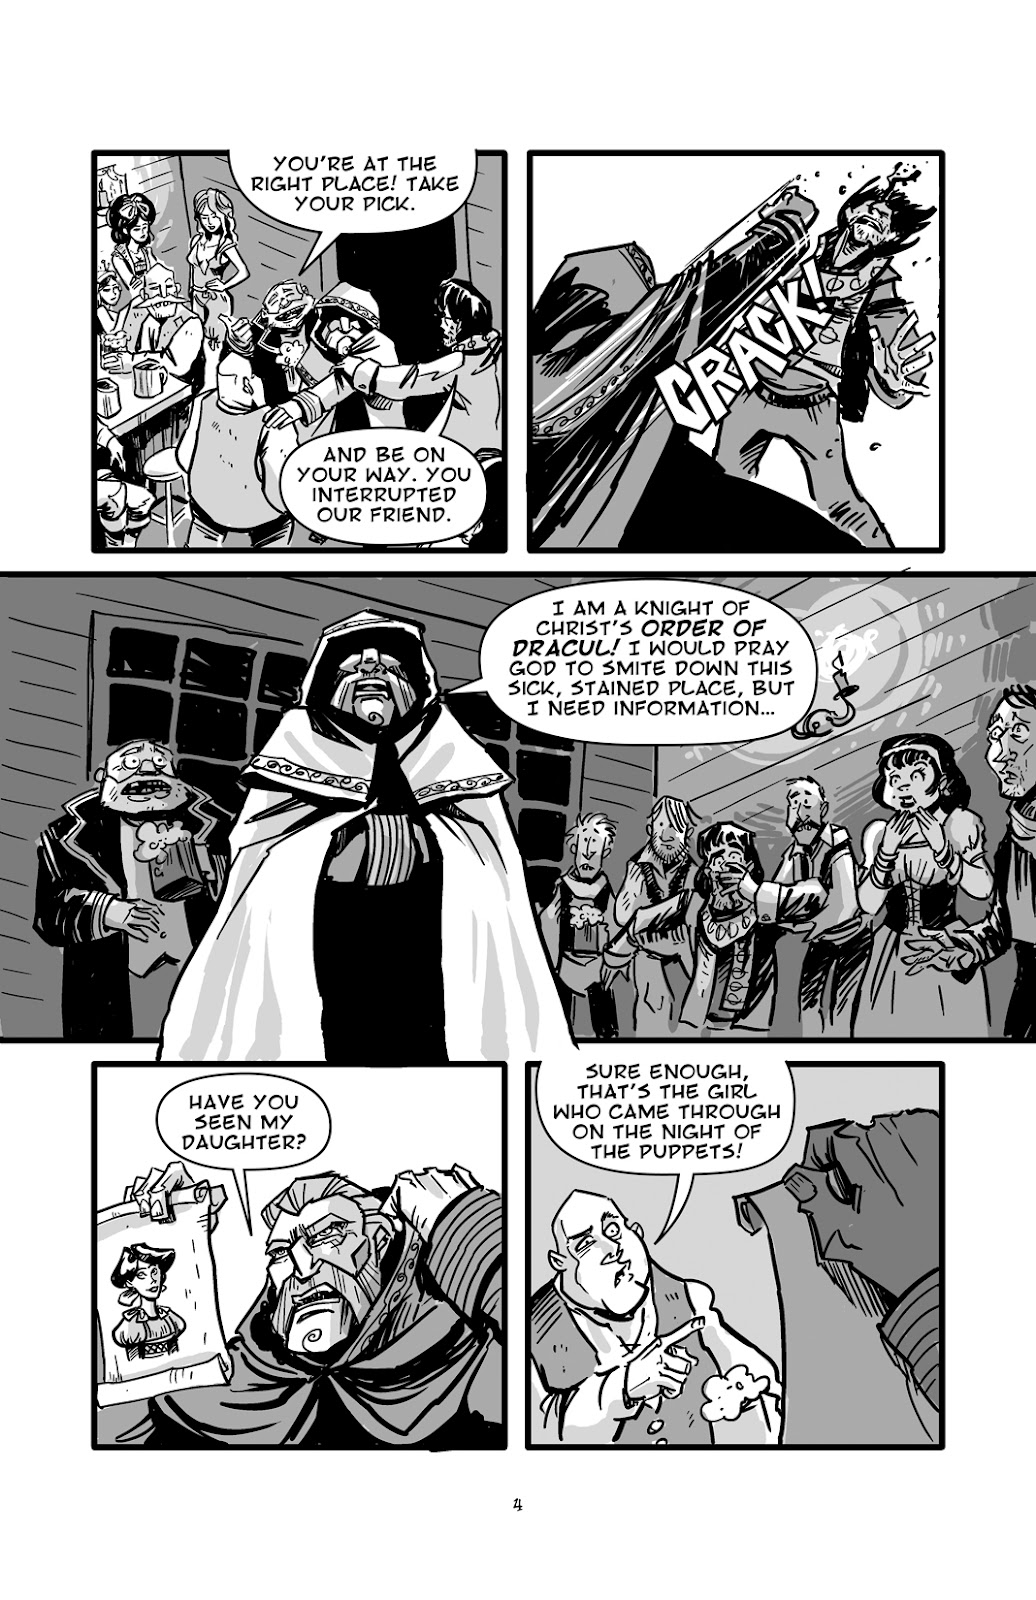 Pinocchio: Vampire Slayer - Of Wood and Blood issue 1 - Page 5